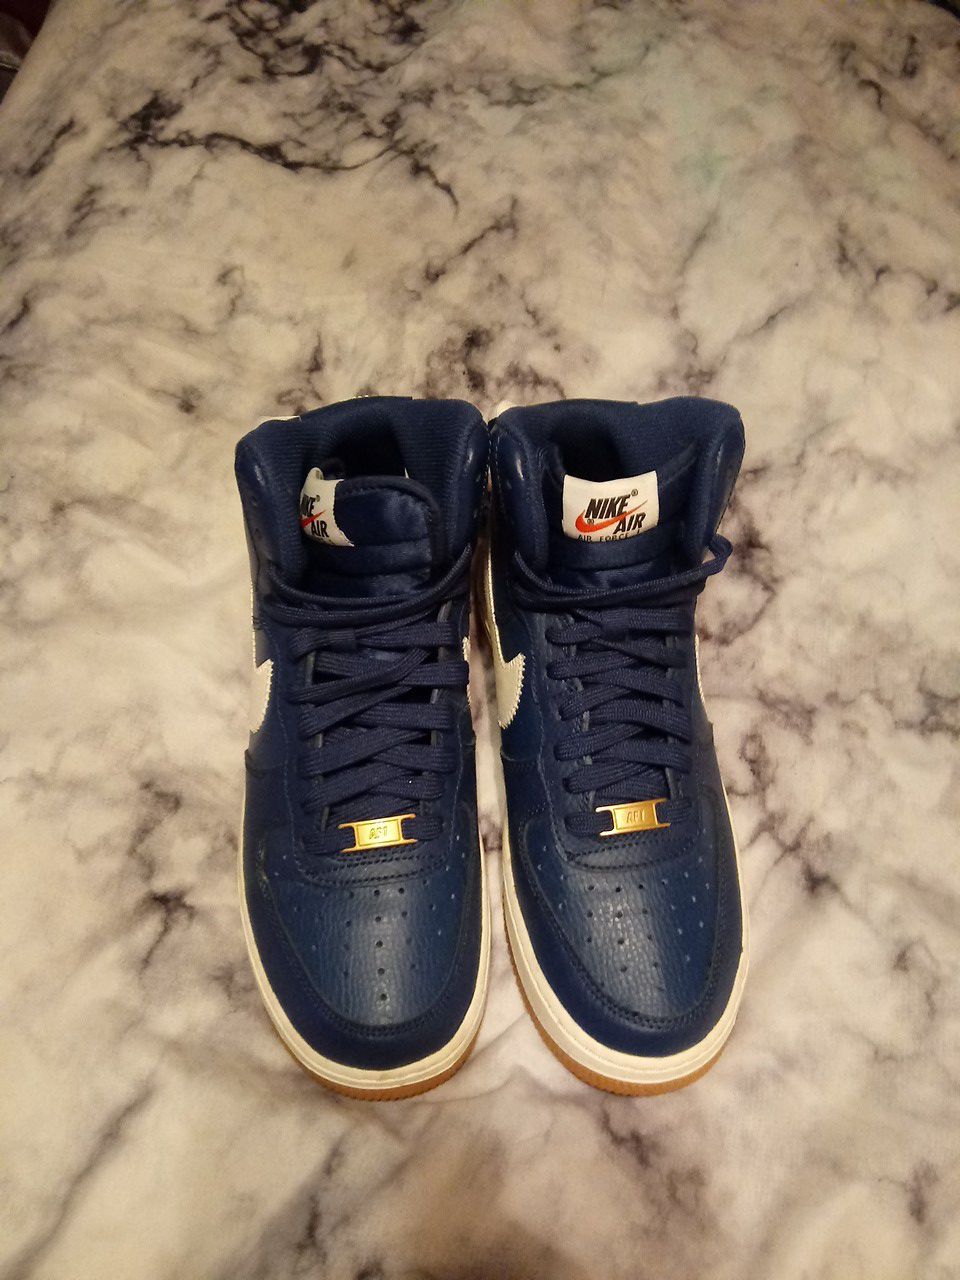 Air Force One High Tops for Sale in Largo, FL - OfferUp